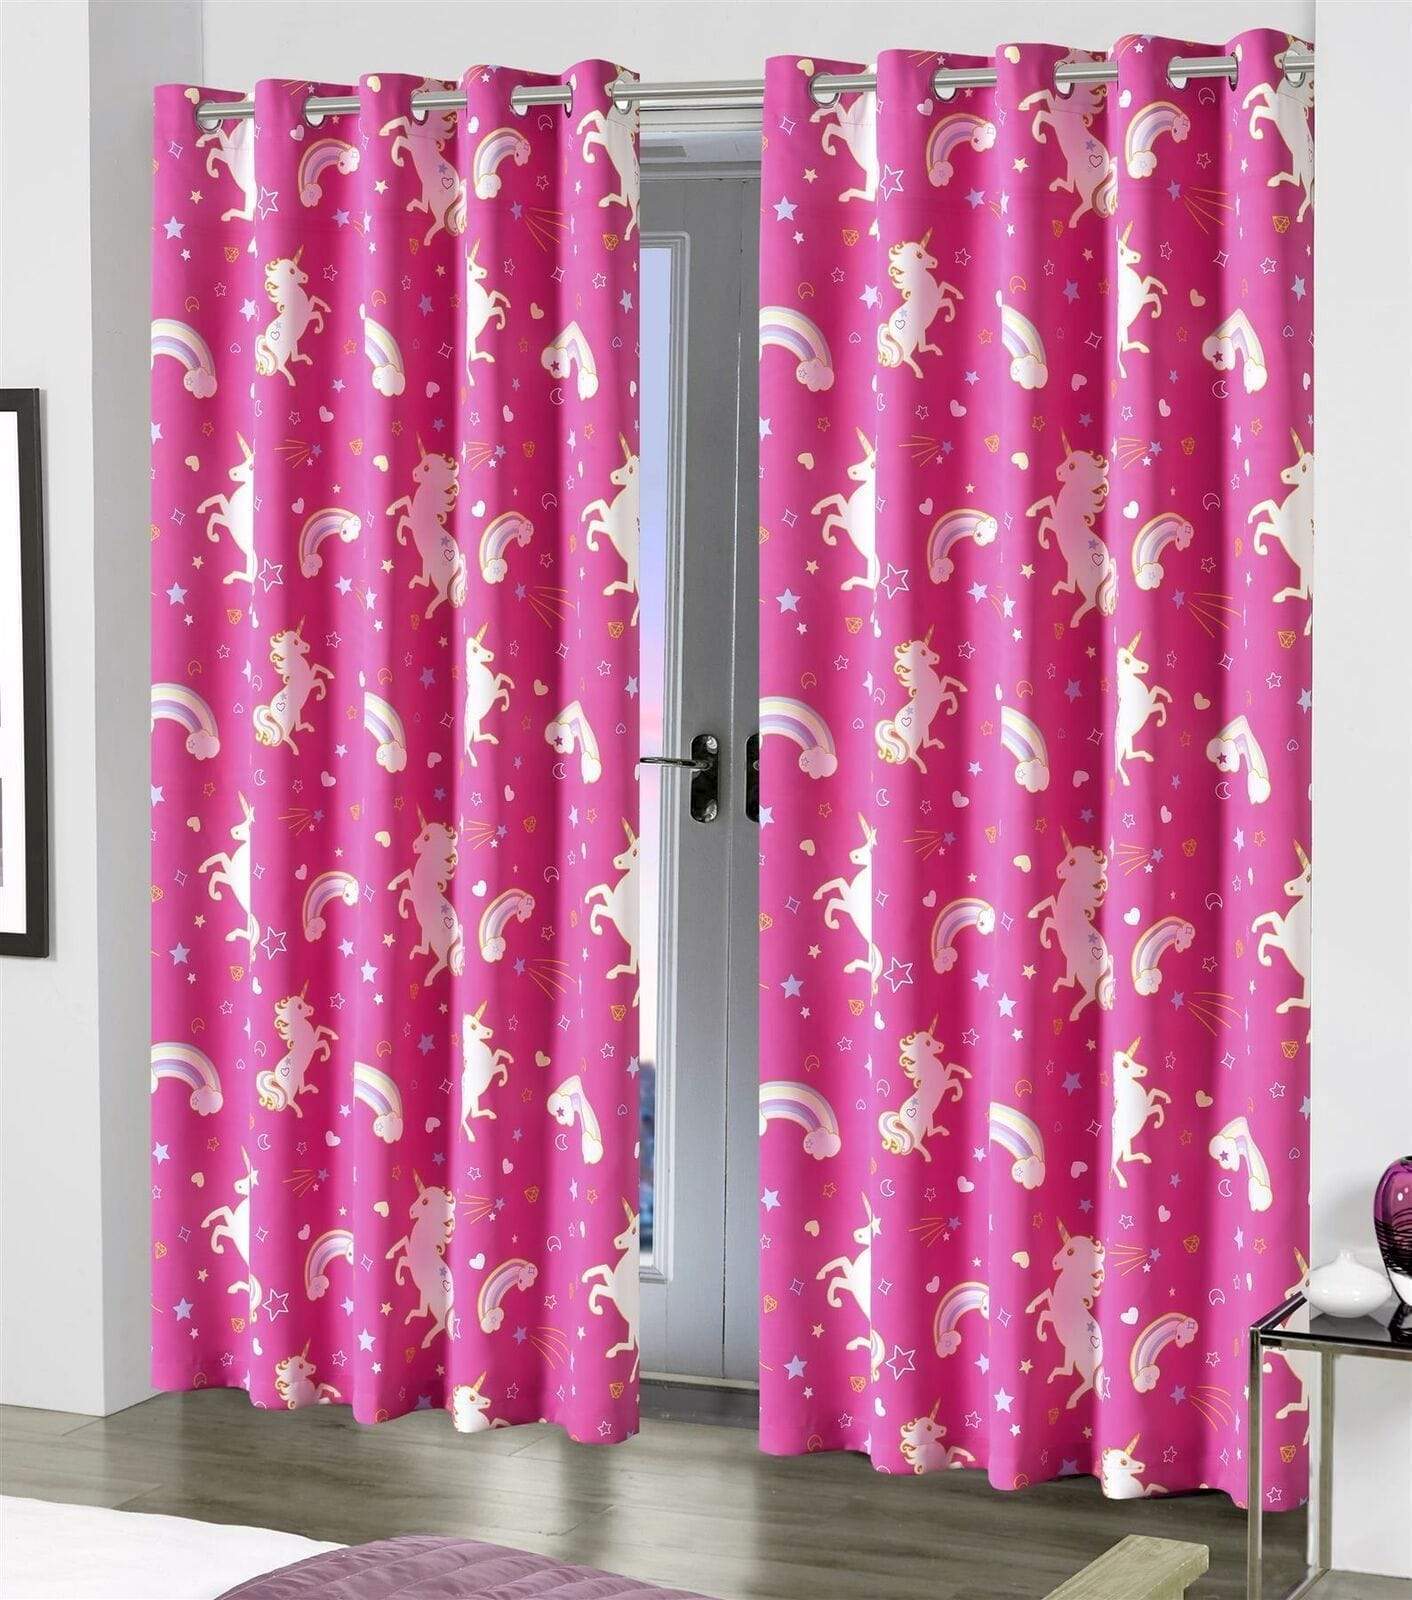 Glow In The Dark Blackout Curtains 46” x 54” / UNICORN OLIVIA ROCCO Curtain